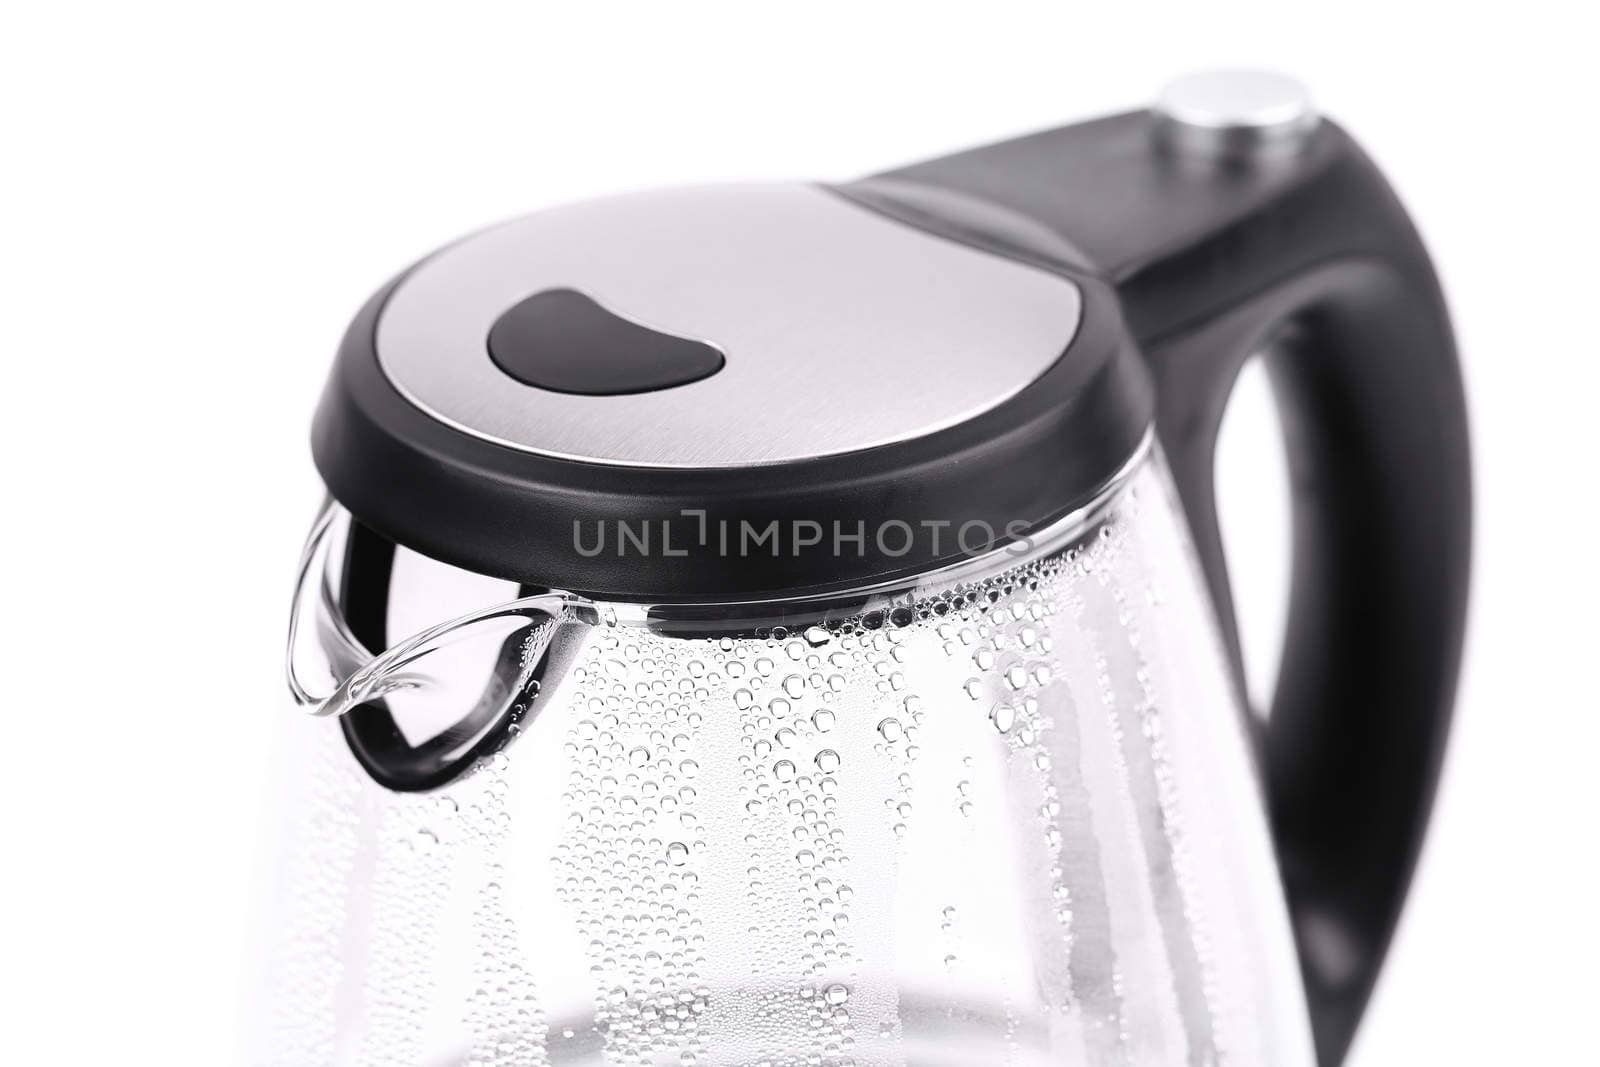 Water boiling in the glass electric kettleon a white background.